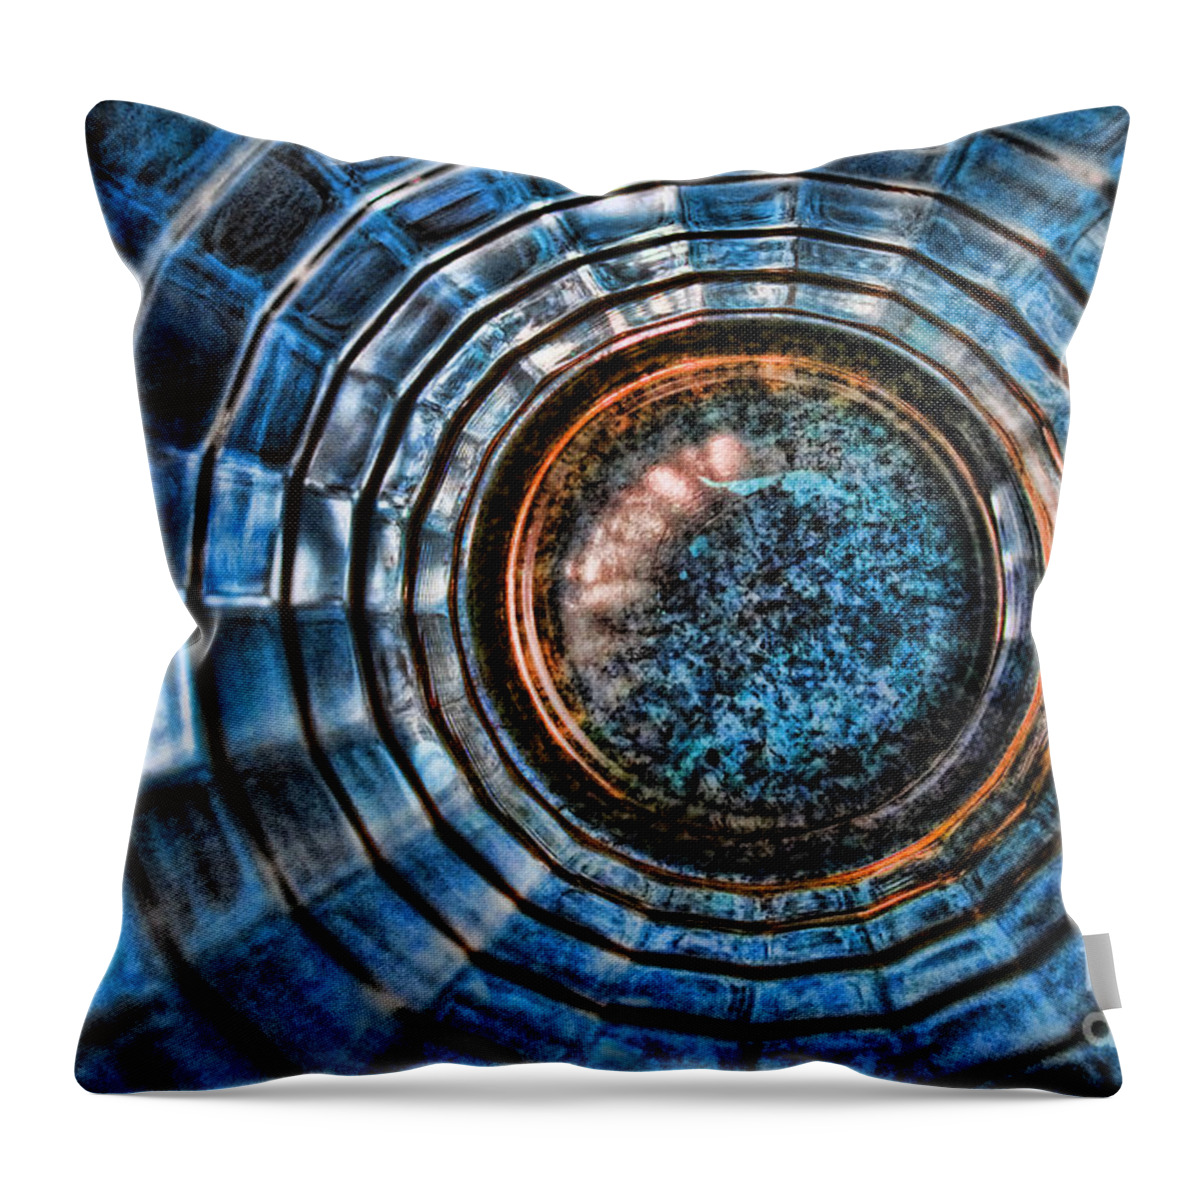 Glass Throw Pillow featuring the photograph Glass Series 3 - The Time Tunnel by Nora Martinez